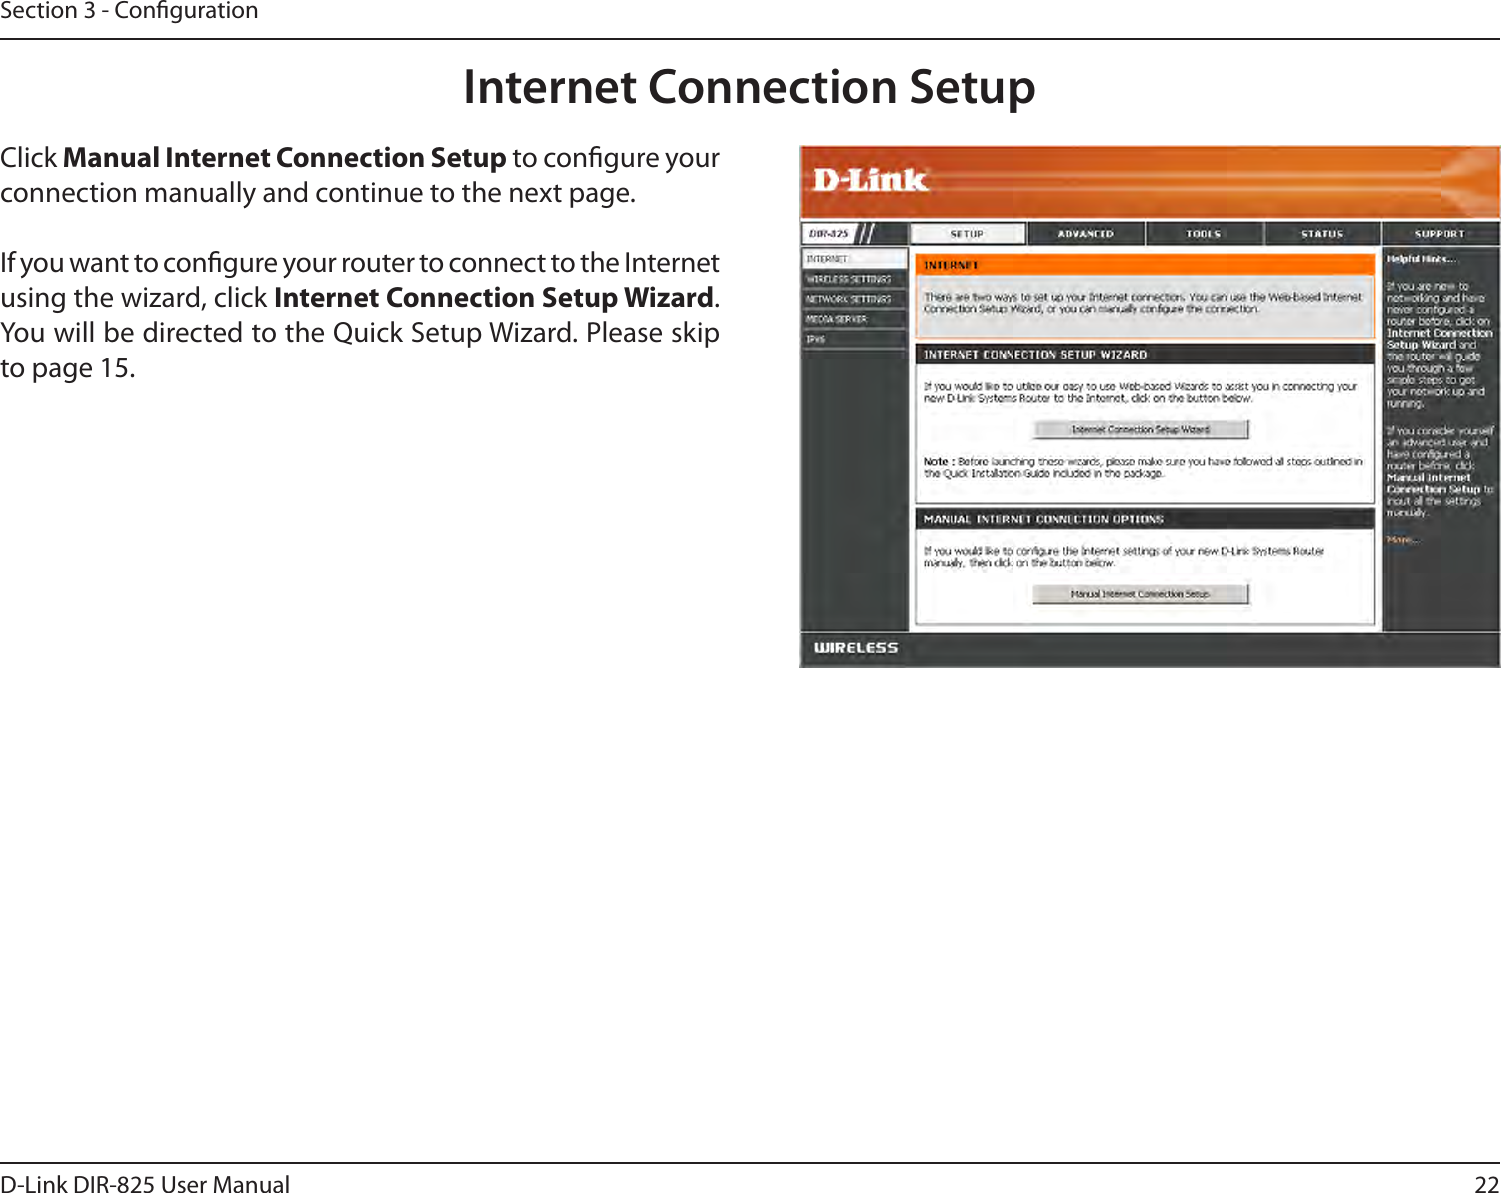 22D-Link DIR-825 User ManualSection 3 - CongurationInternet Connection SetupClick Manual Internet Connection Setup to congure your connection manually and continue to the next page.If you want to congure your router to connect to the Internet using the wizard, click Internet Connection Setup Wizard. You will be directed to the Quick Setup Wizard. Please skip to page 15.